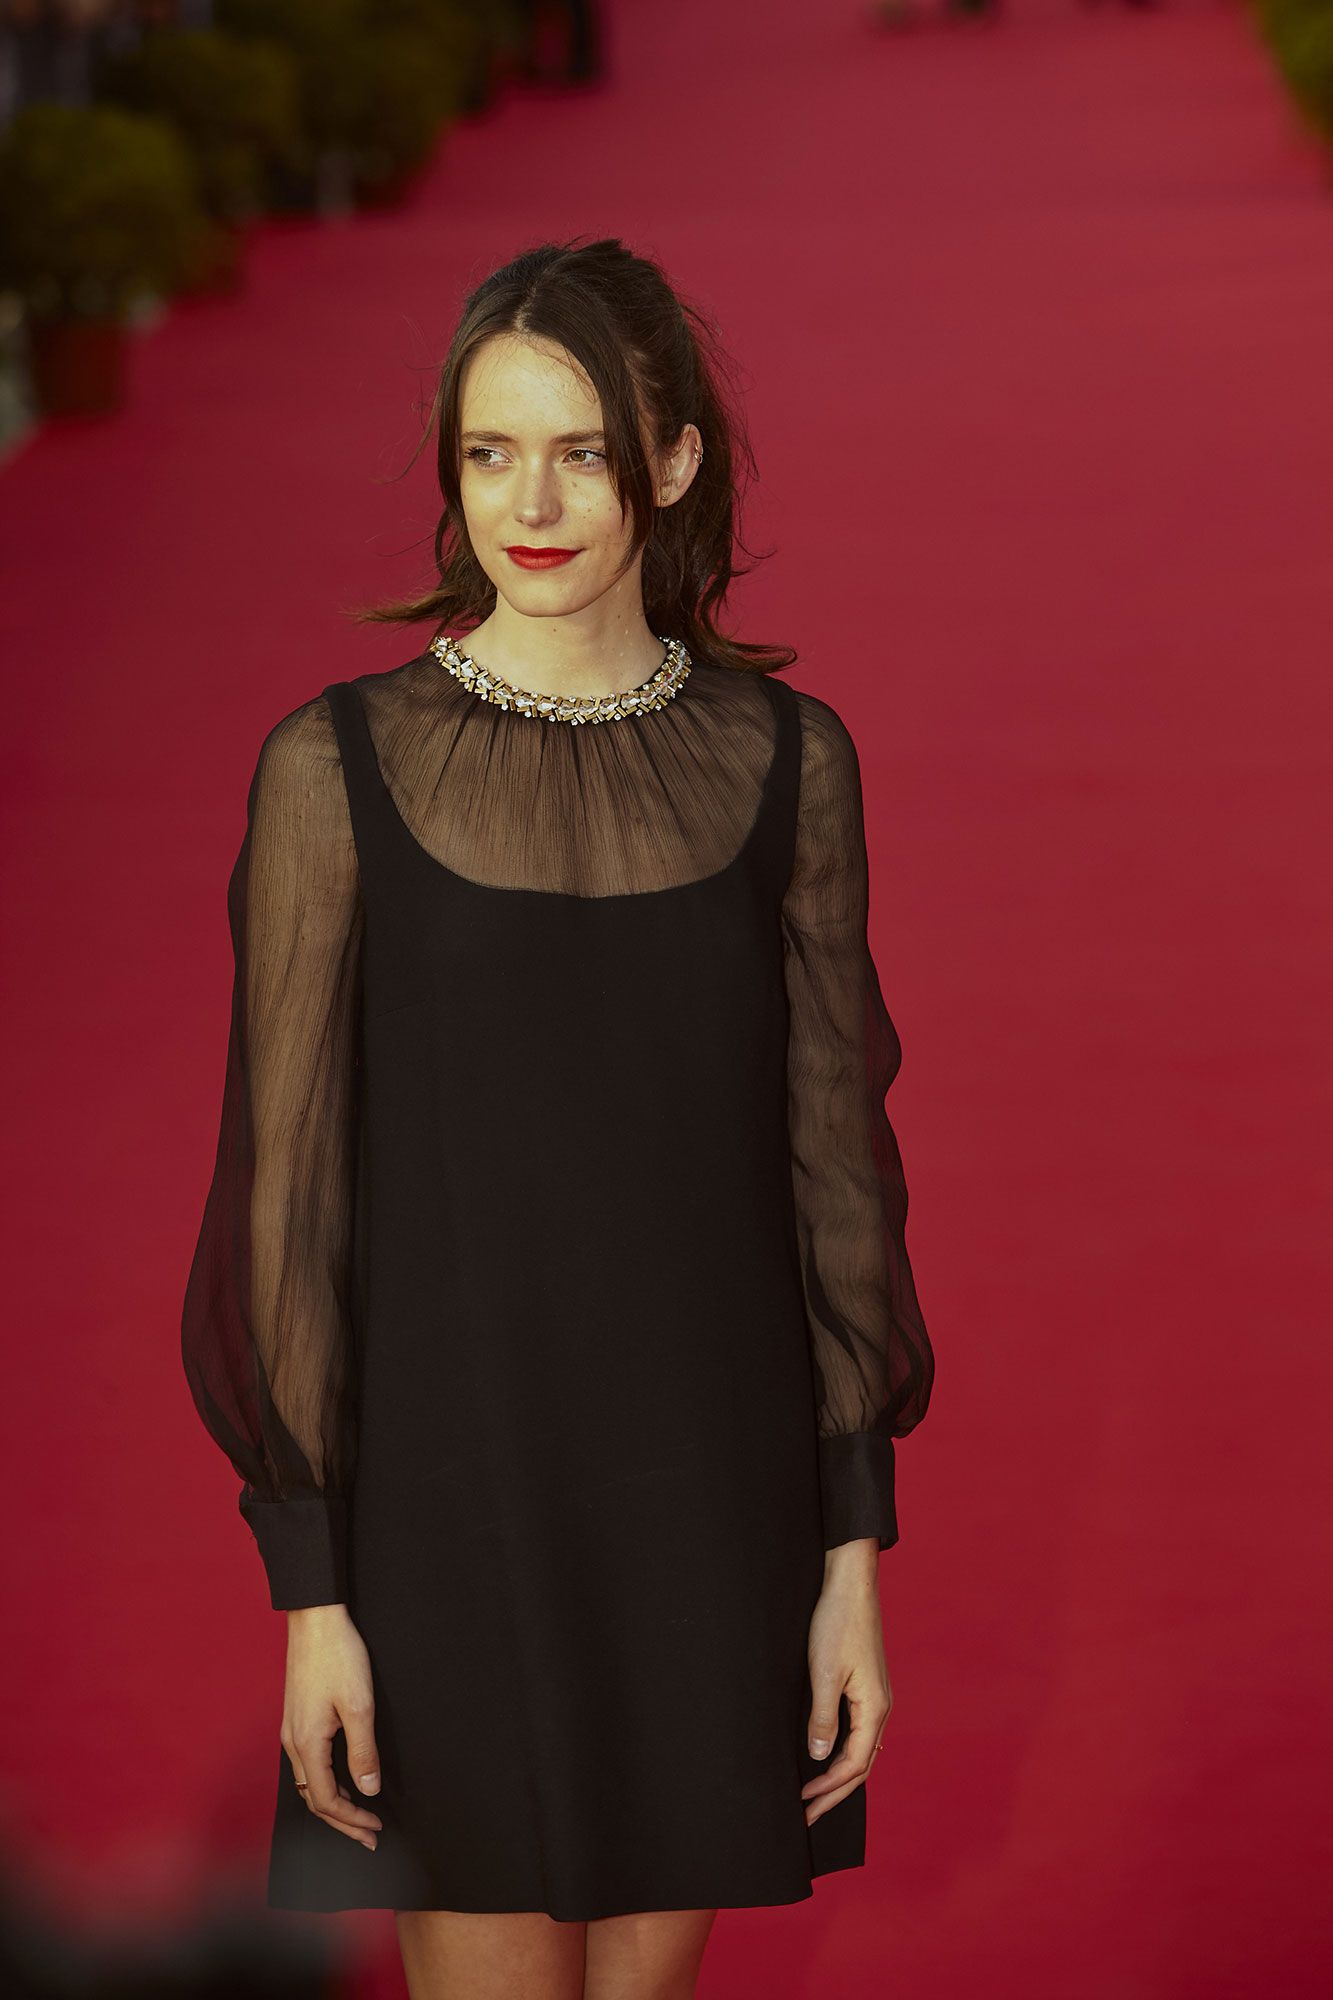 Stacy Martin
*Maquillage Dr Hauschka Coiffure Franck Provost*, *Roger Vivier *